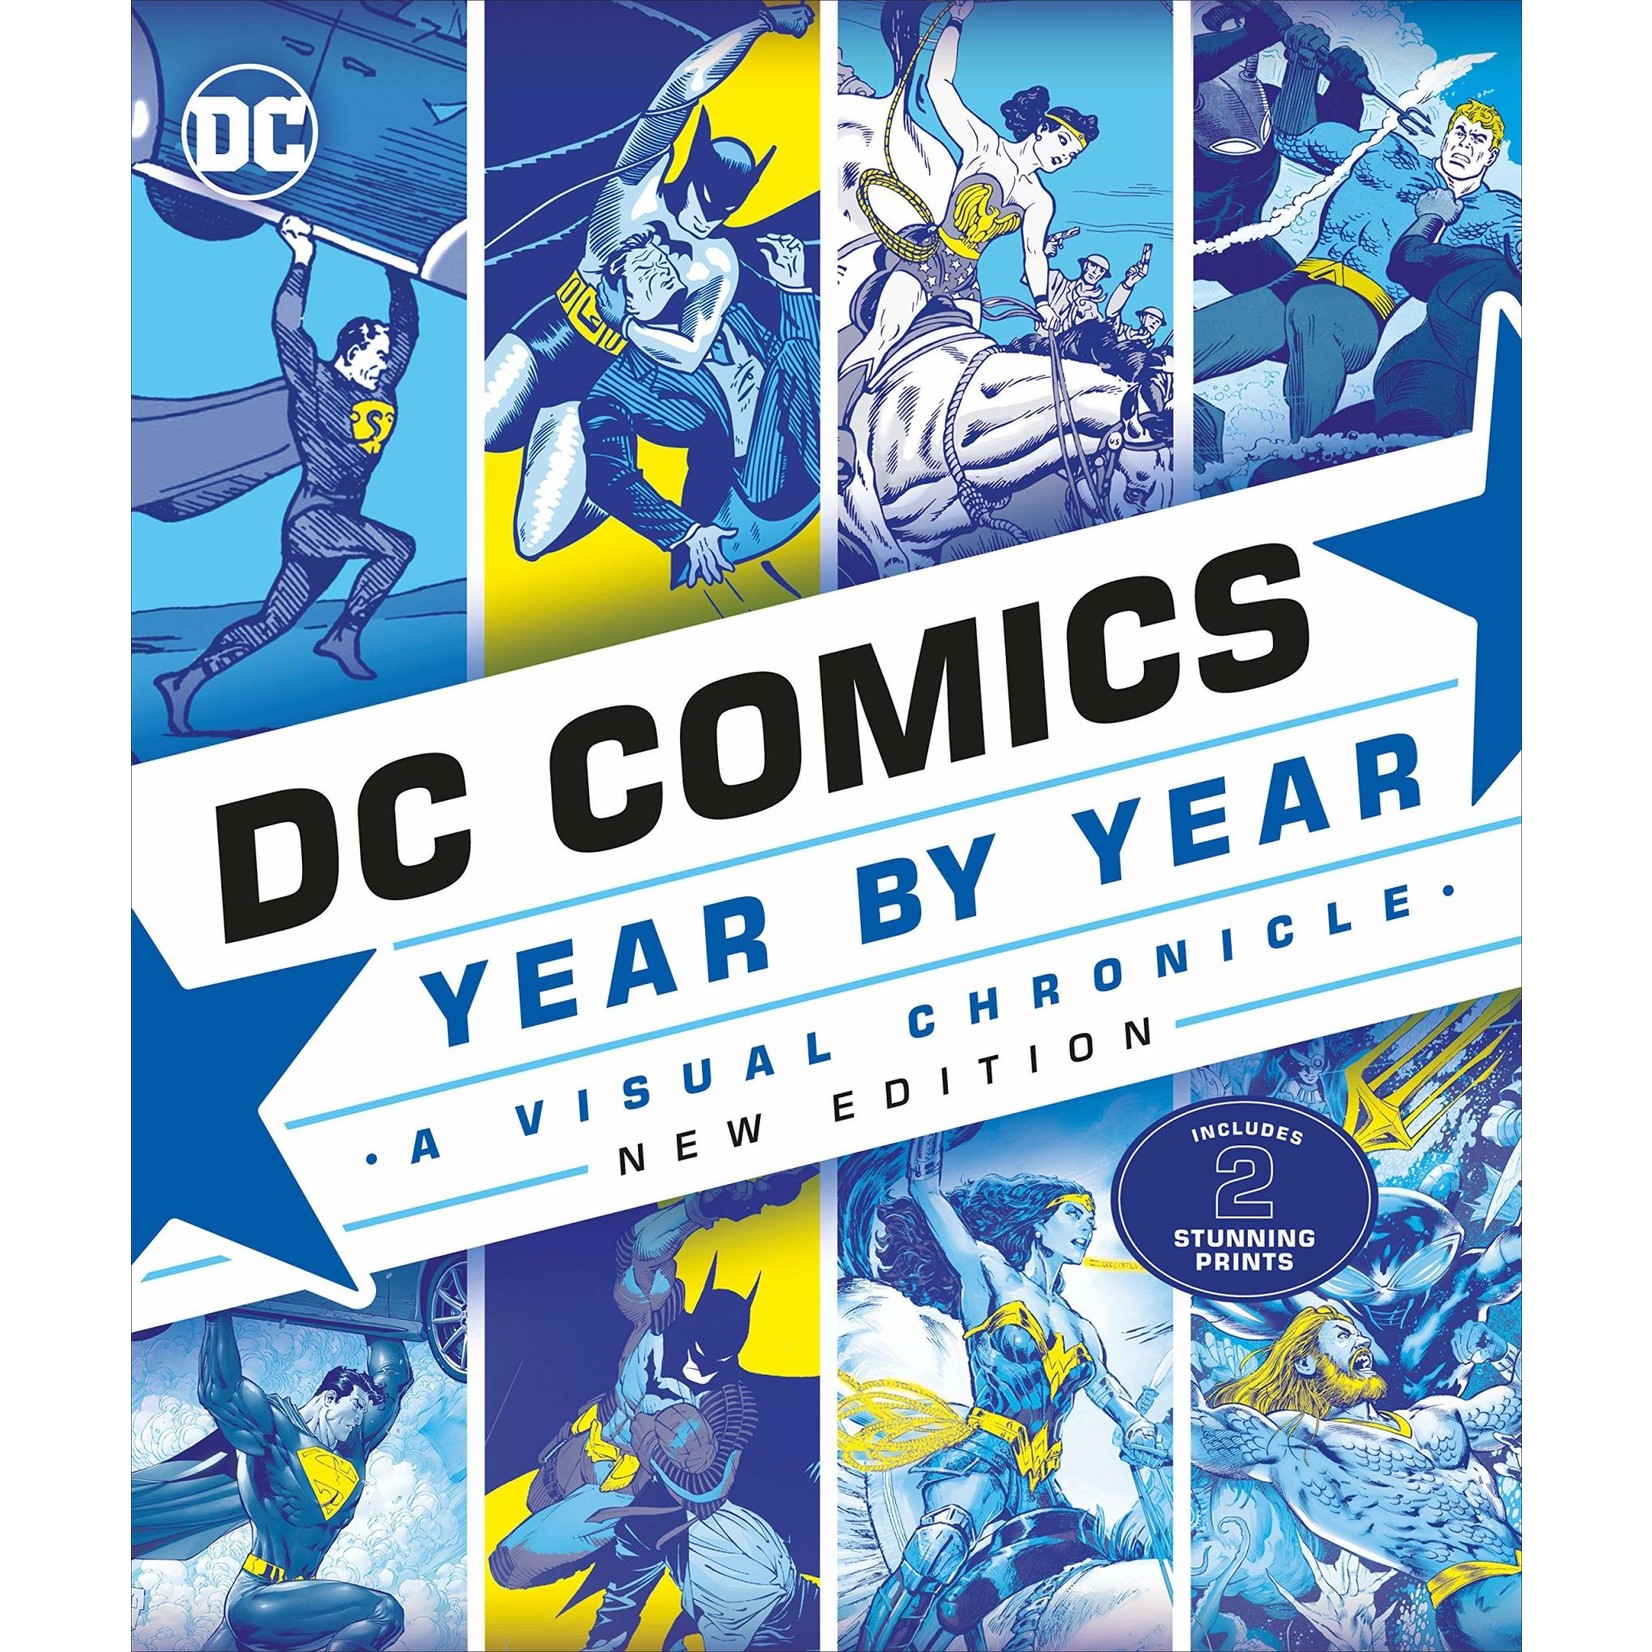 DK DC Comics Year By Year, New Edition: A Visual Chronicle